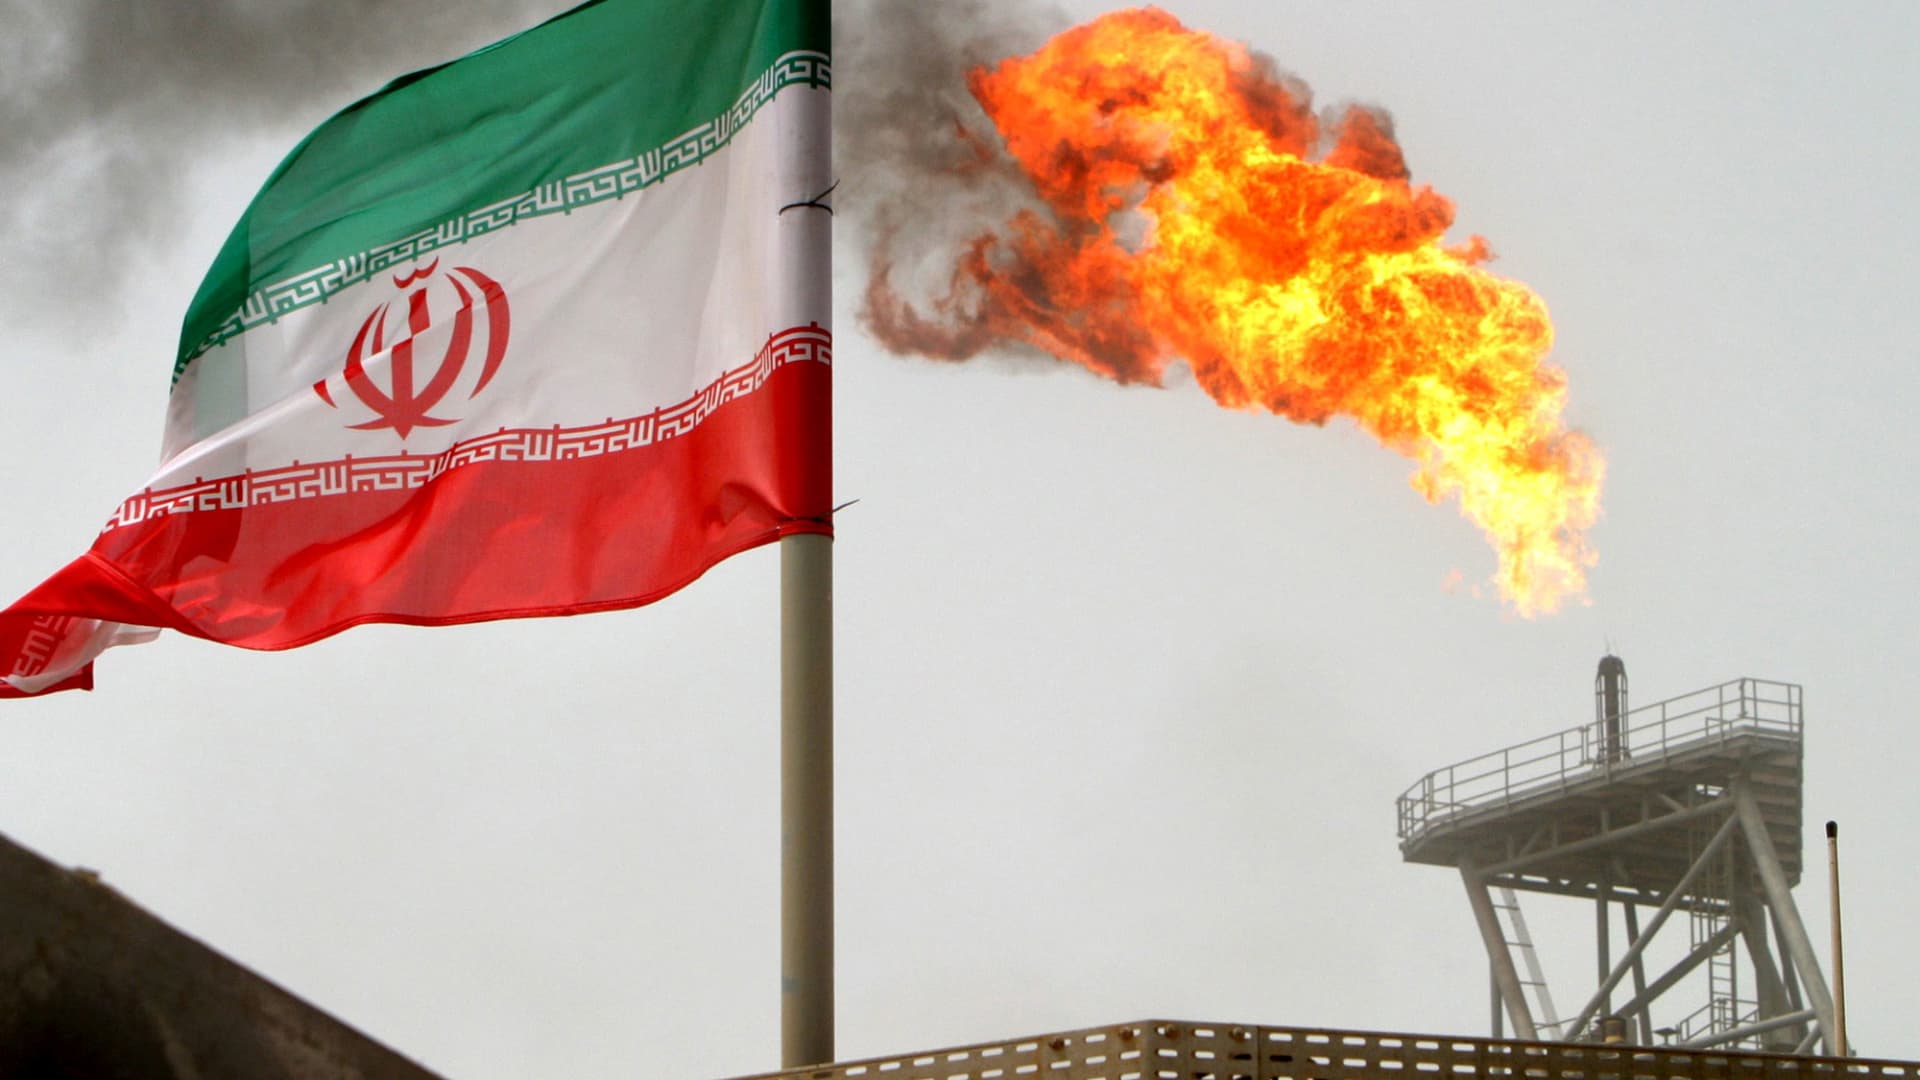 An Iran nuclear deal revival may dramatically alter oil costs